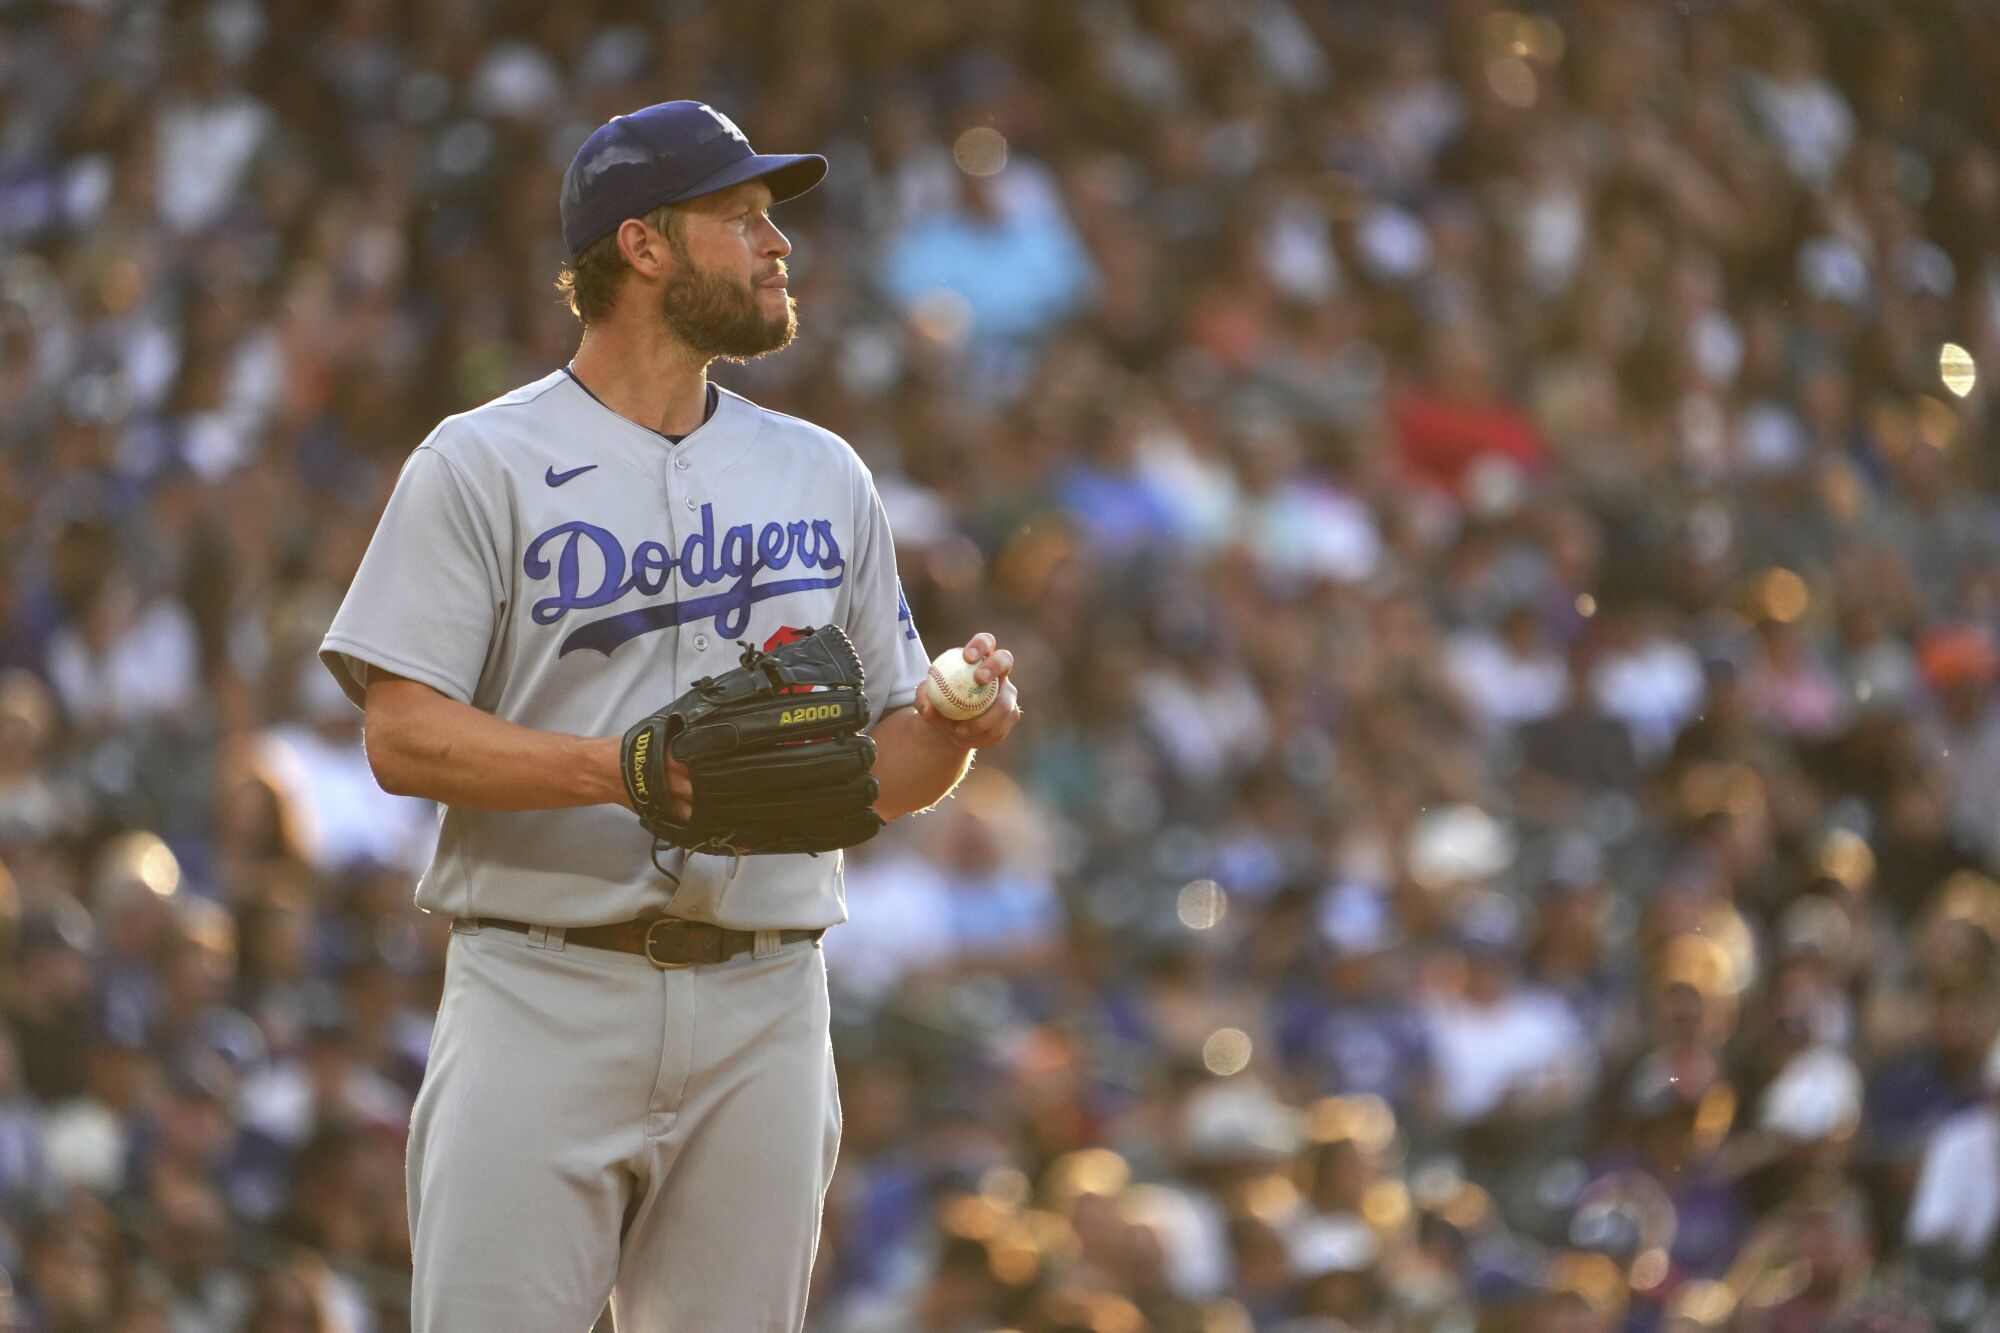 Dodgers starting pitcher Clayton Kershaw looks on against the Rockies.